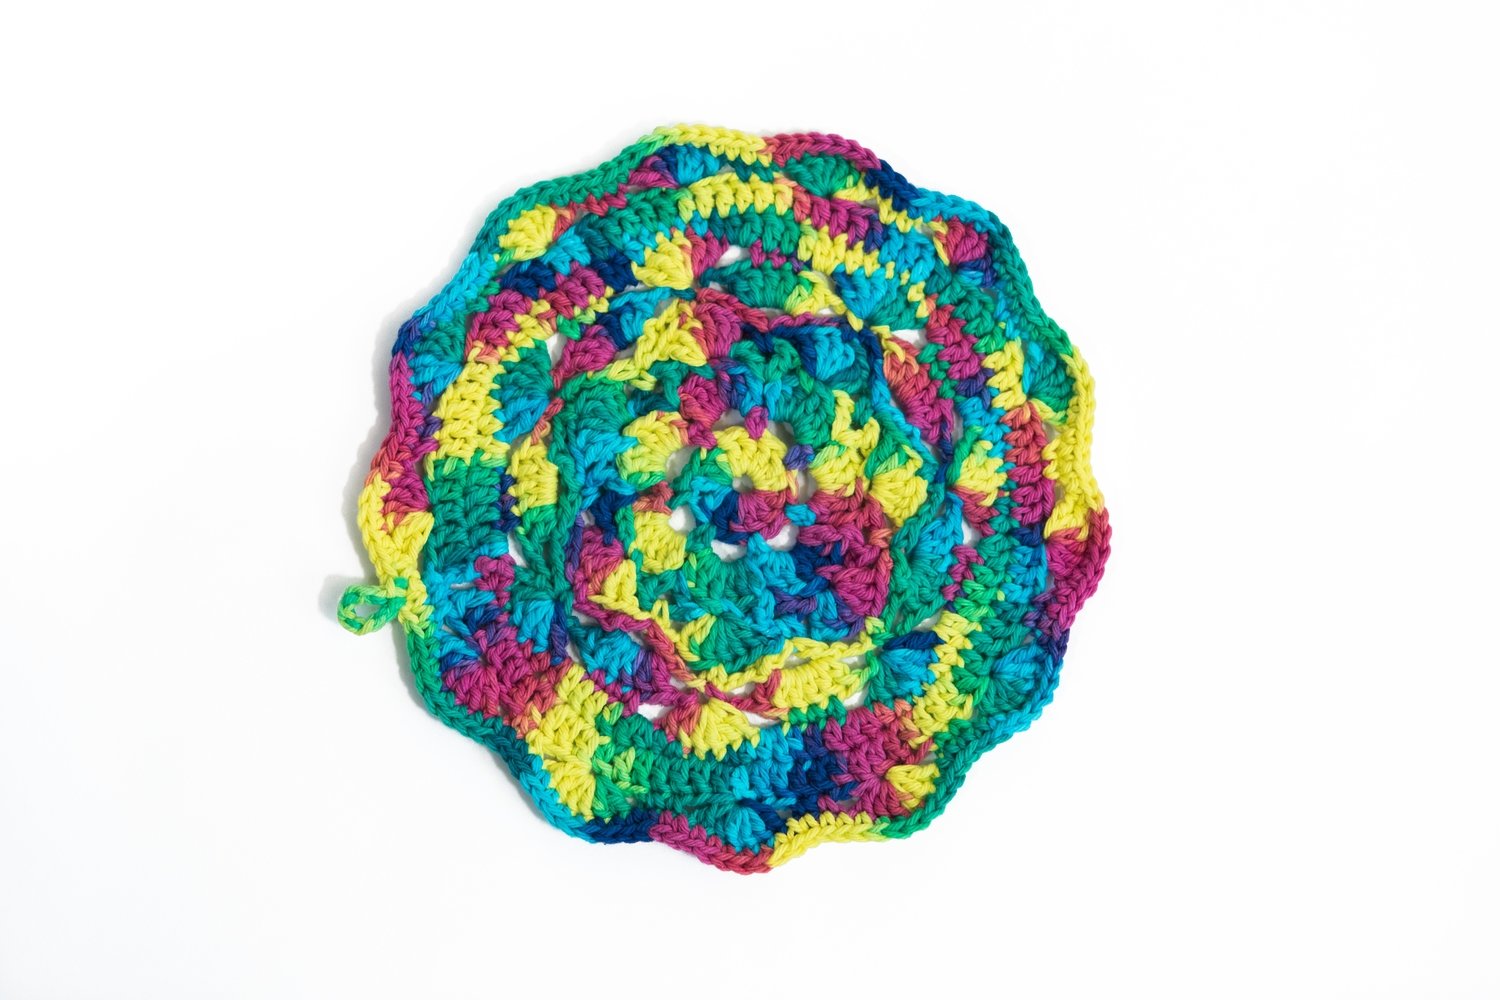 8" Multi-Colored Spiral Knit Dishcloth or Hot Pad